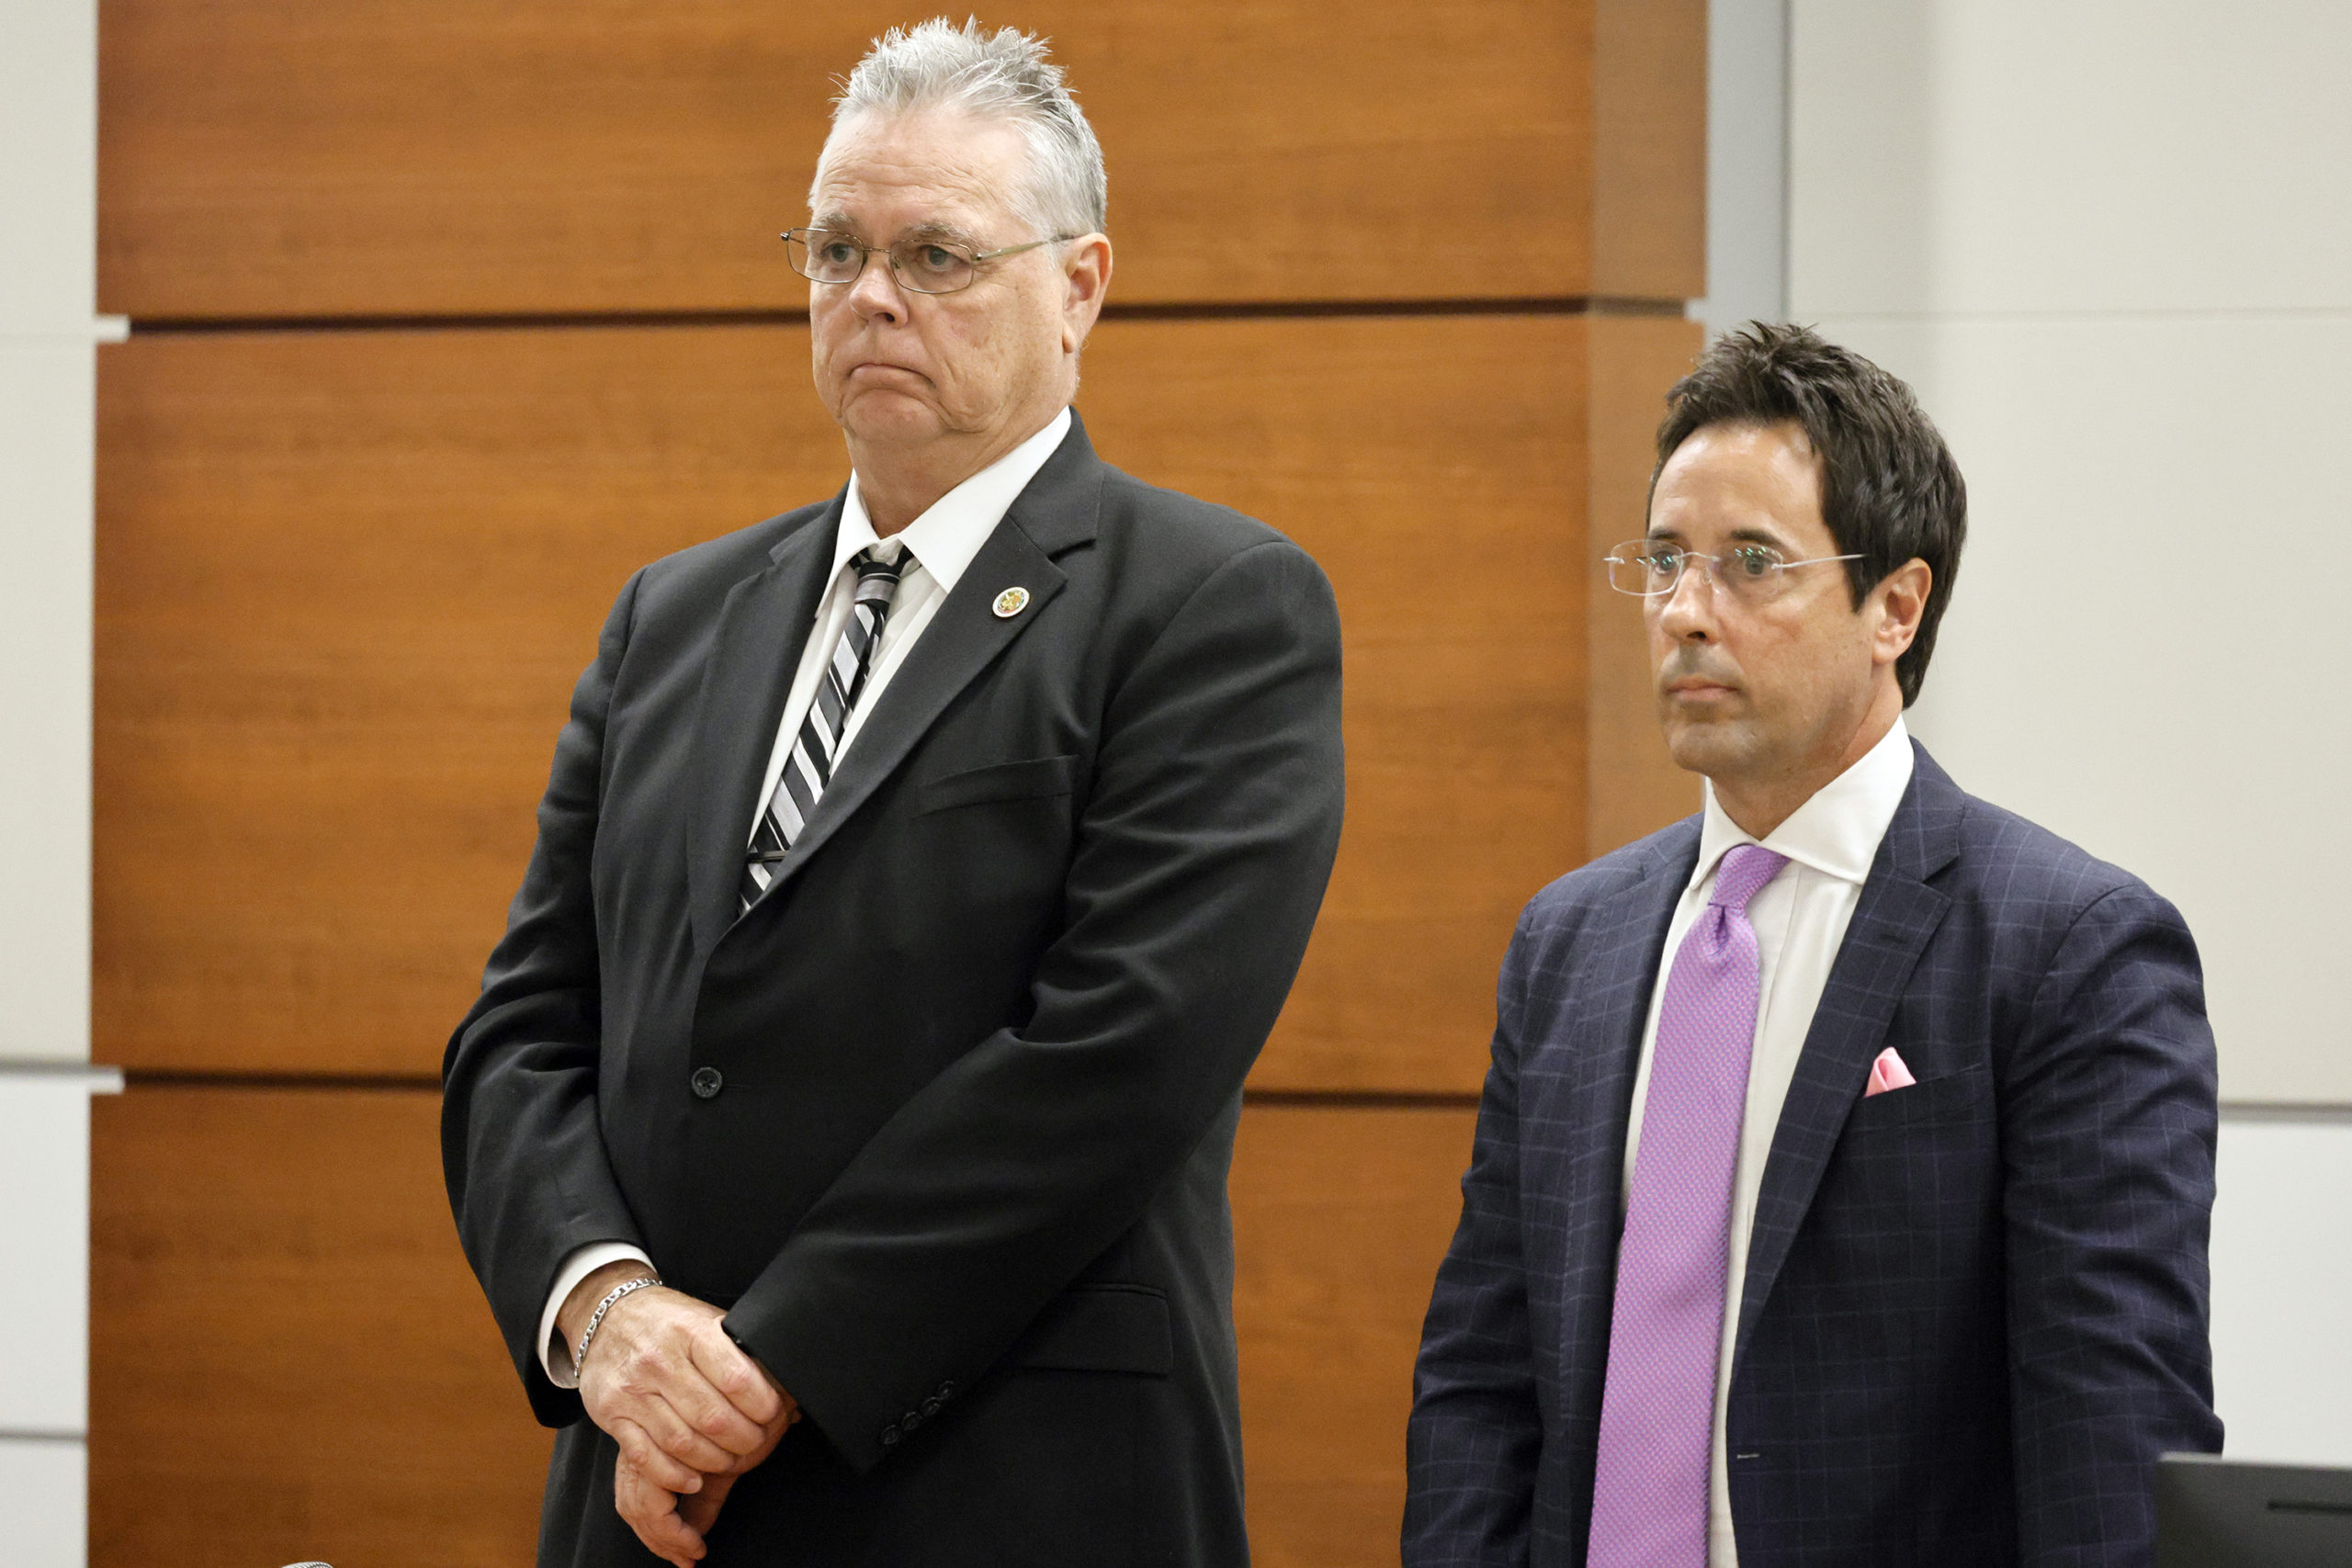 Former Marjory Stoneman Douglas High School School Resource Officer Scot Peterson, left, and defense attorney Mark Eiglarsh, right, stand as the jury enters the courtroom to be dismissed on Wednesday from Broward County Courthouse in Fort Lauderdale, Florida.